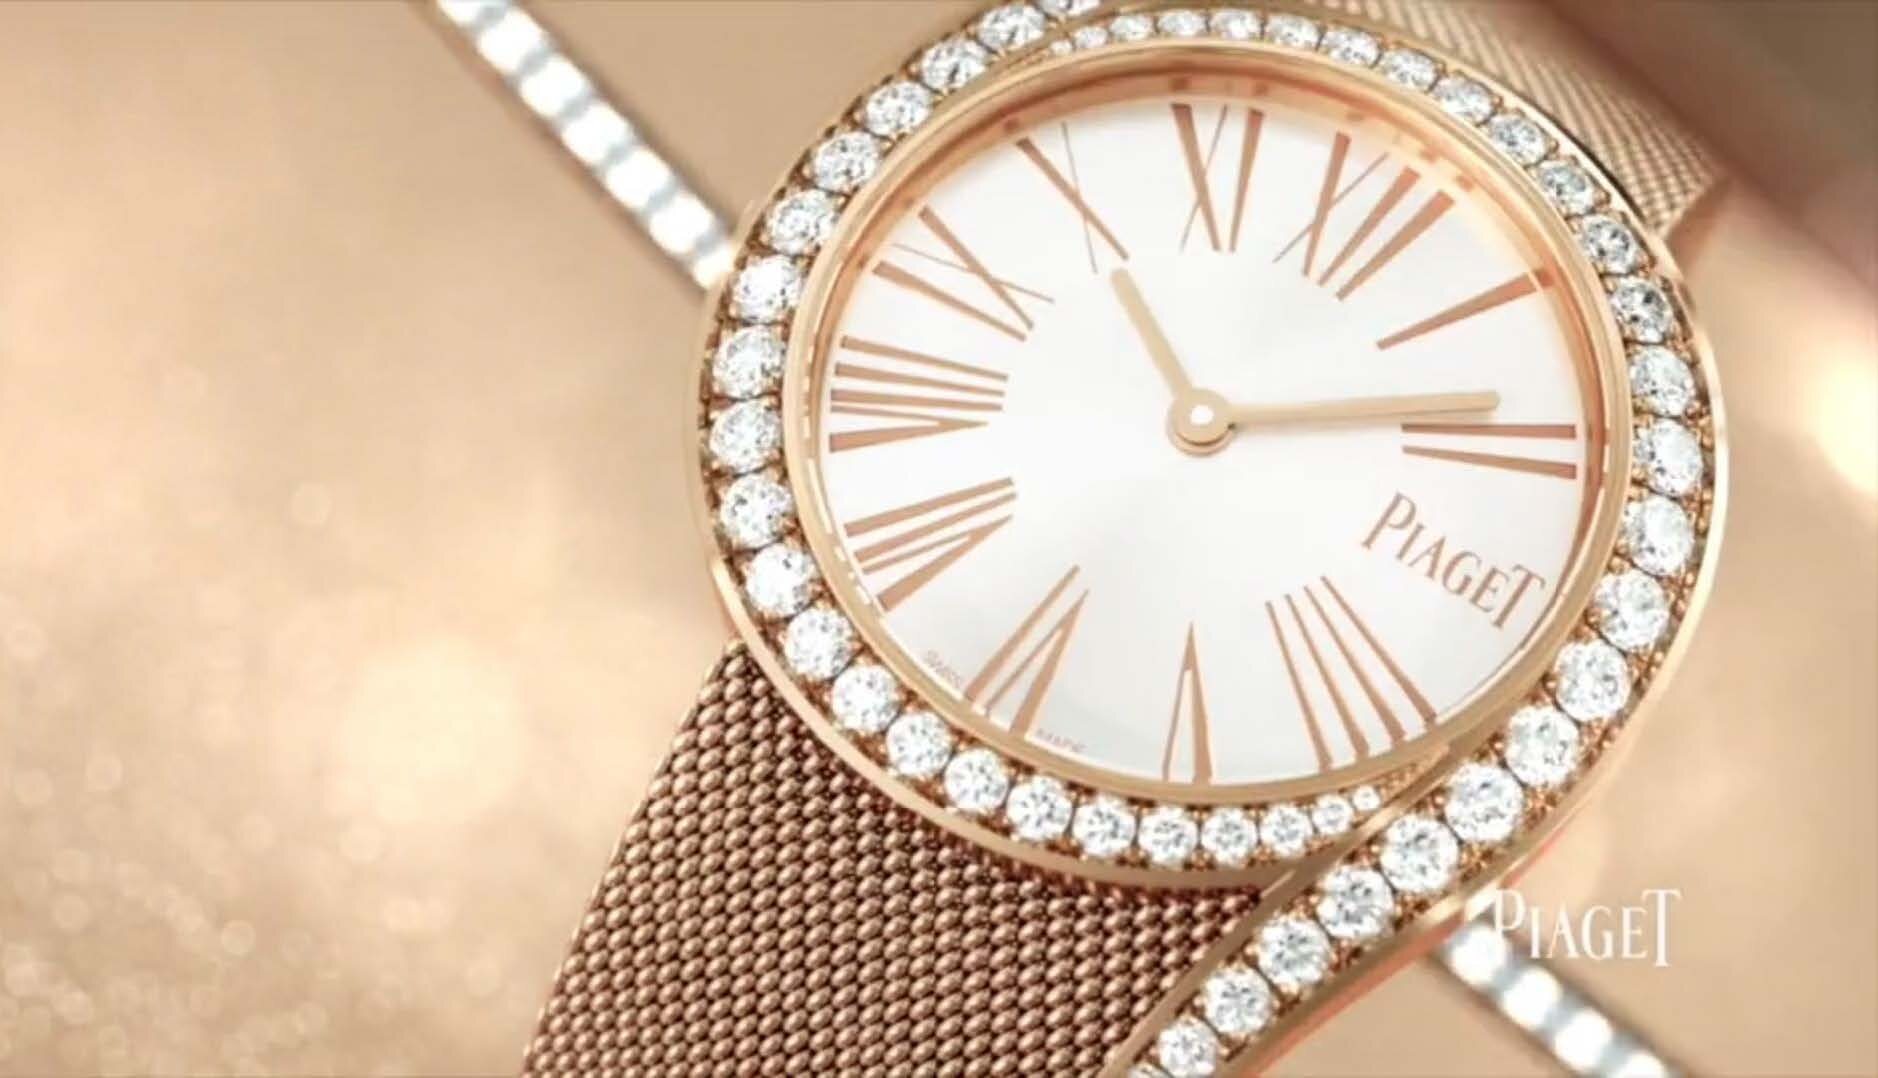 Piaget creative used on Emirates Airlines (Copy)